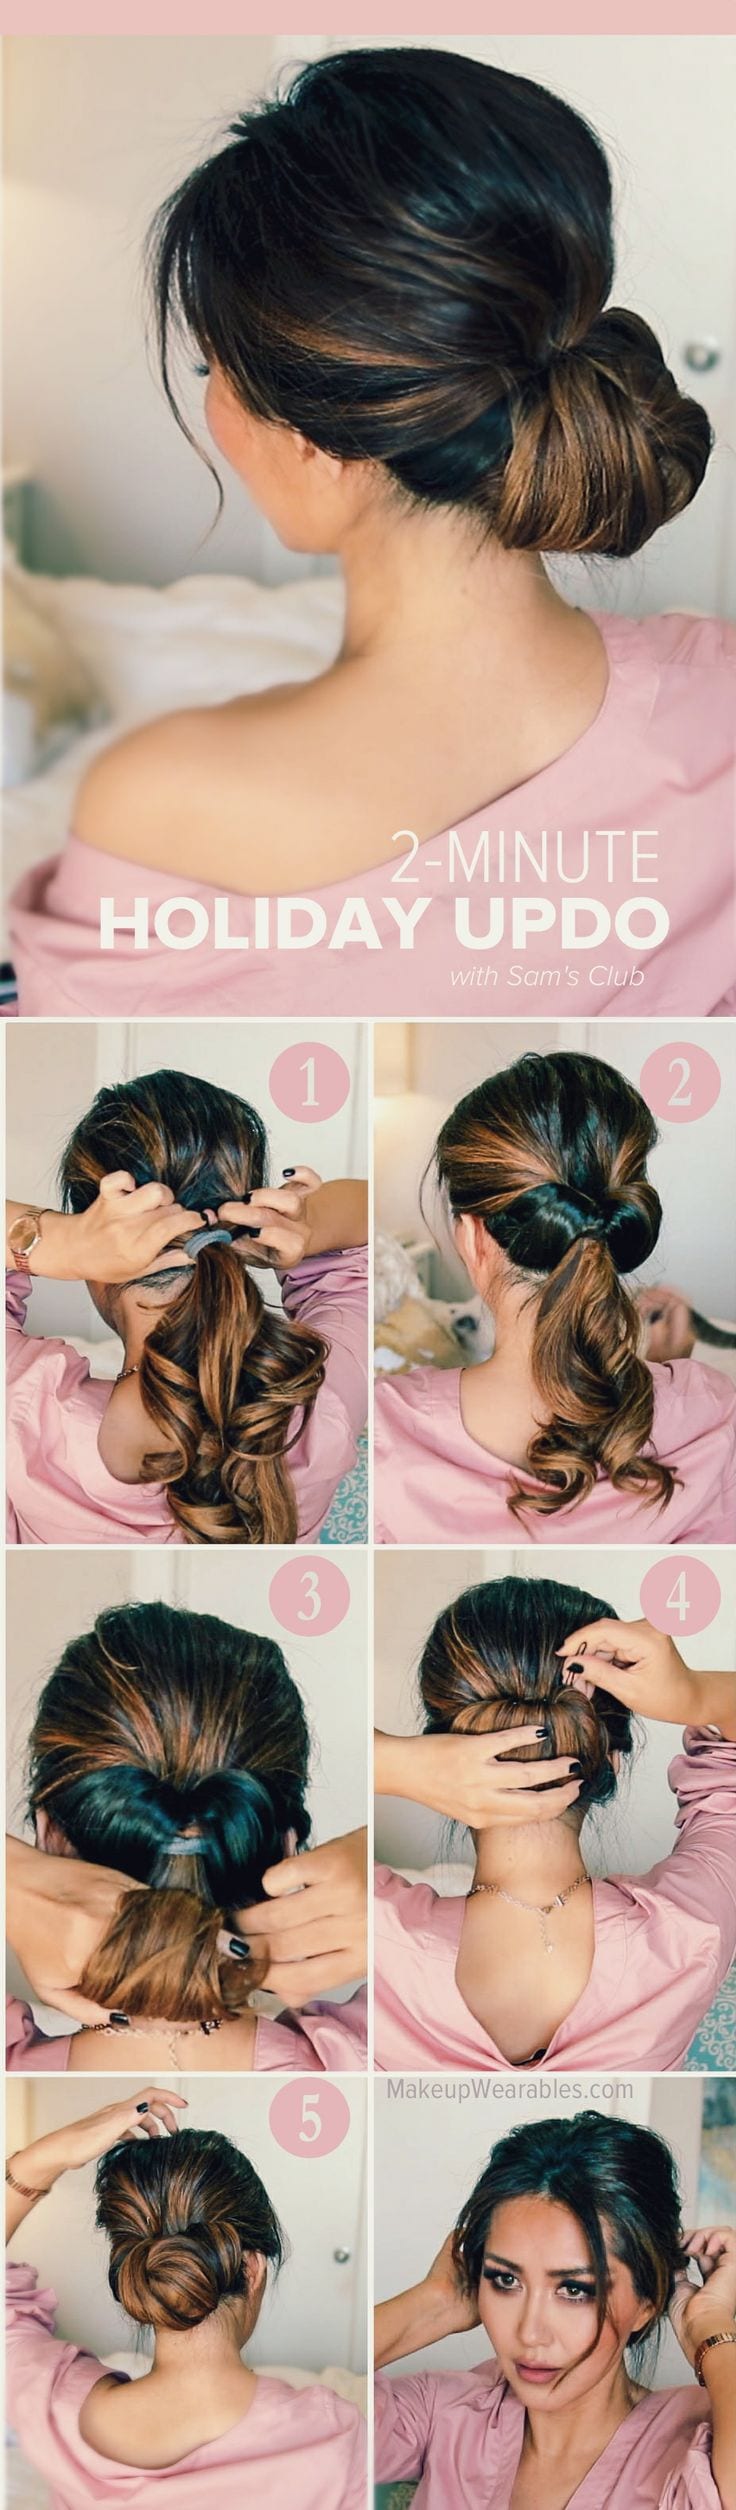 [ad_1]

HOW TO: 2-MINUTE ELEGANT HOLIDAY UPDOS
Source by Sheilavwaes
[ad_2]
			
			…